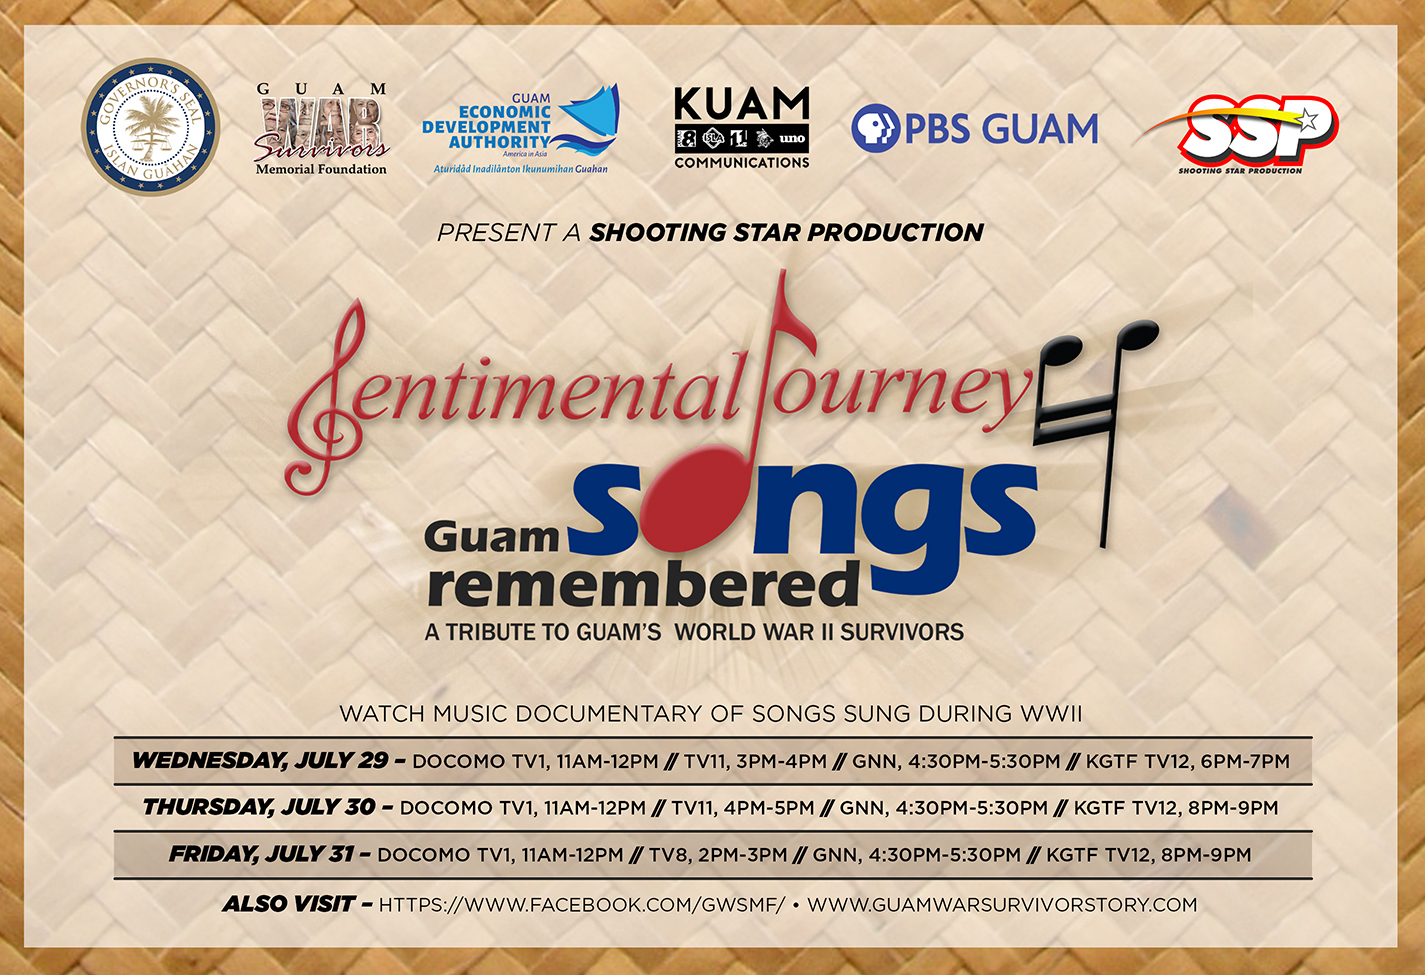 Reflect, recognize and remember Guam's history of songs sung during World War II. Music has always been a gift of love.